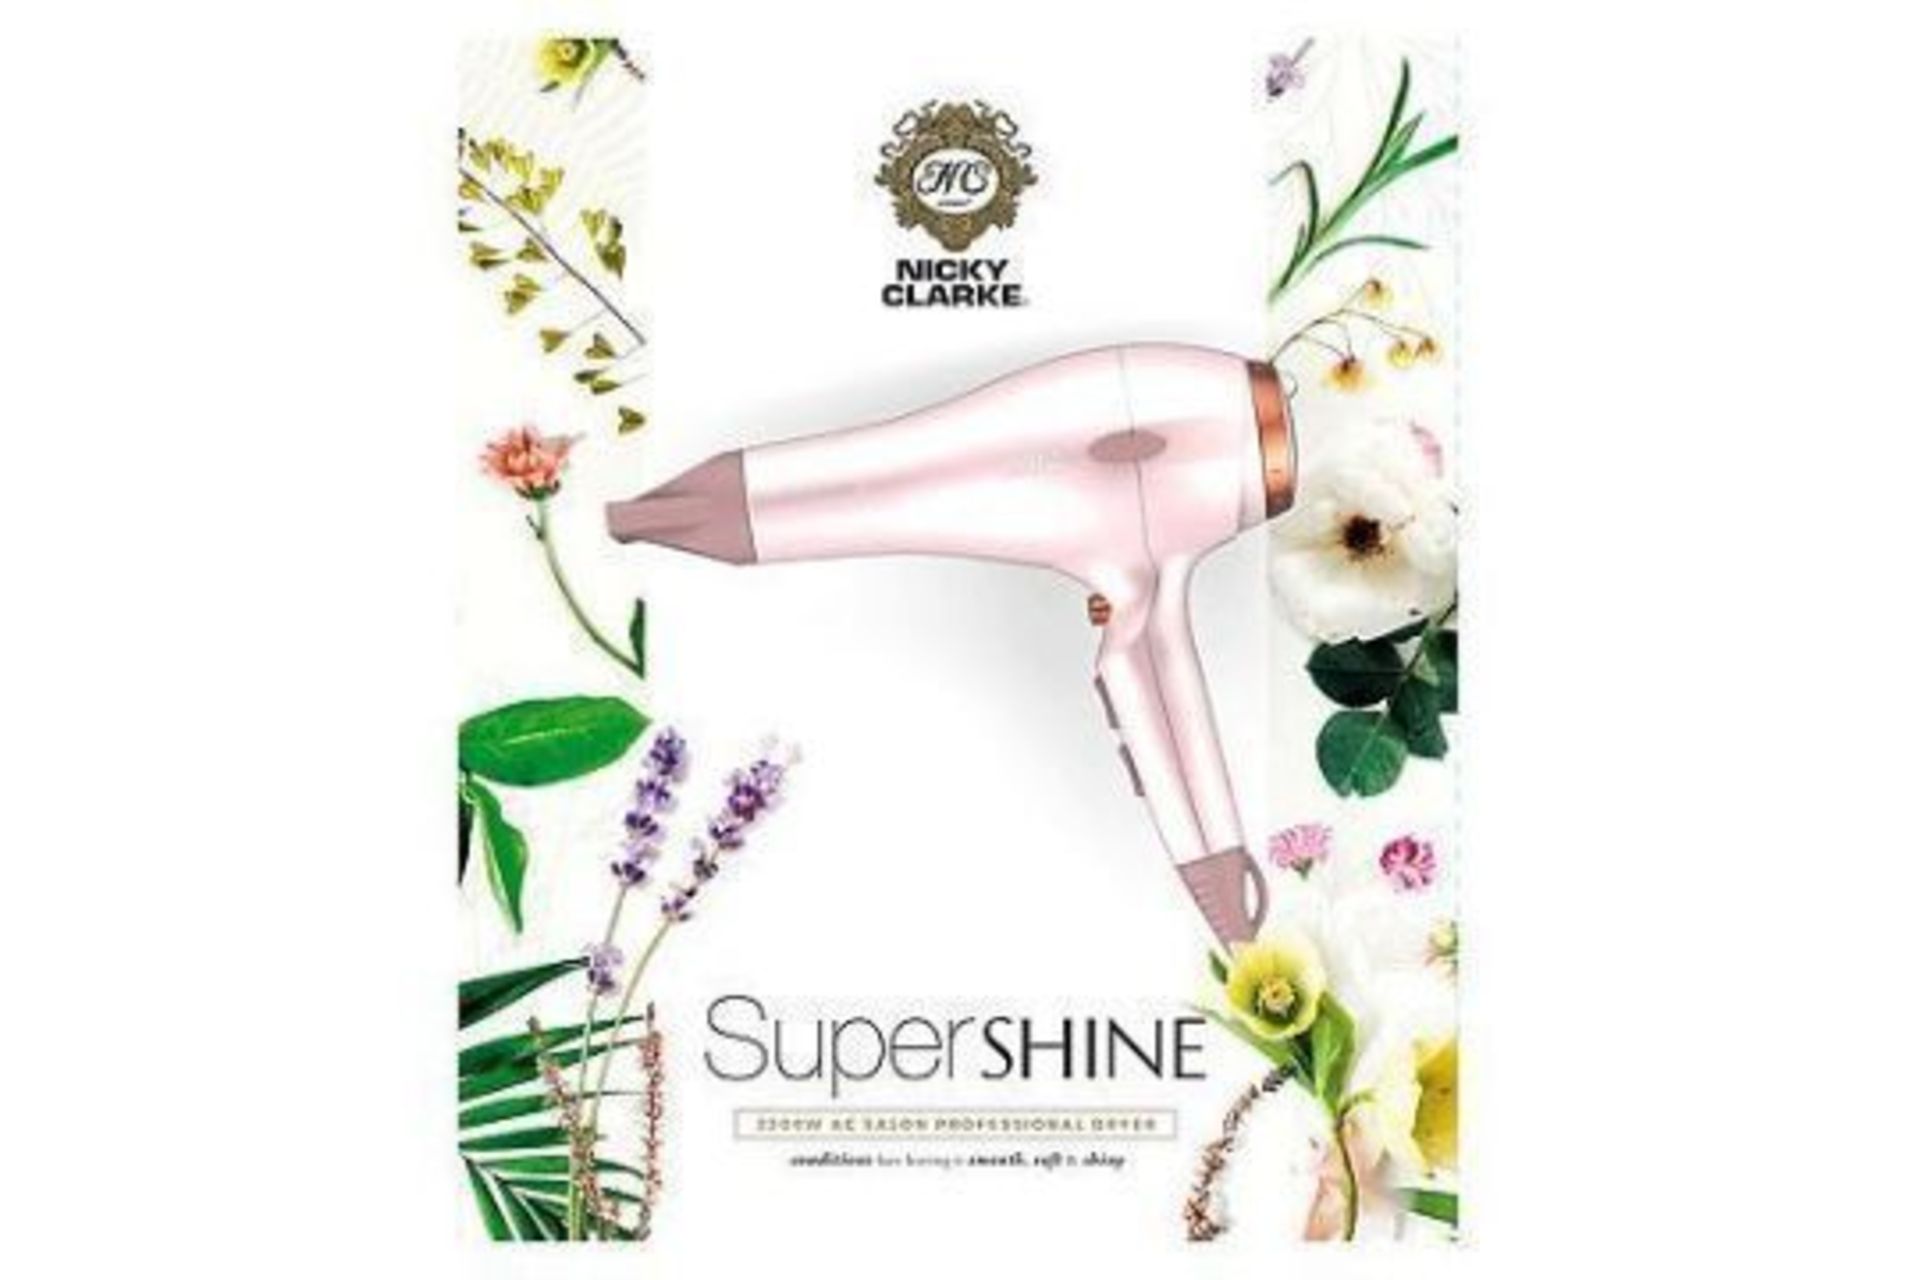 New Nicky Clarke Pink Supershine Hair Dryer - RRP £49.99. - Image 2 of 2